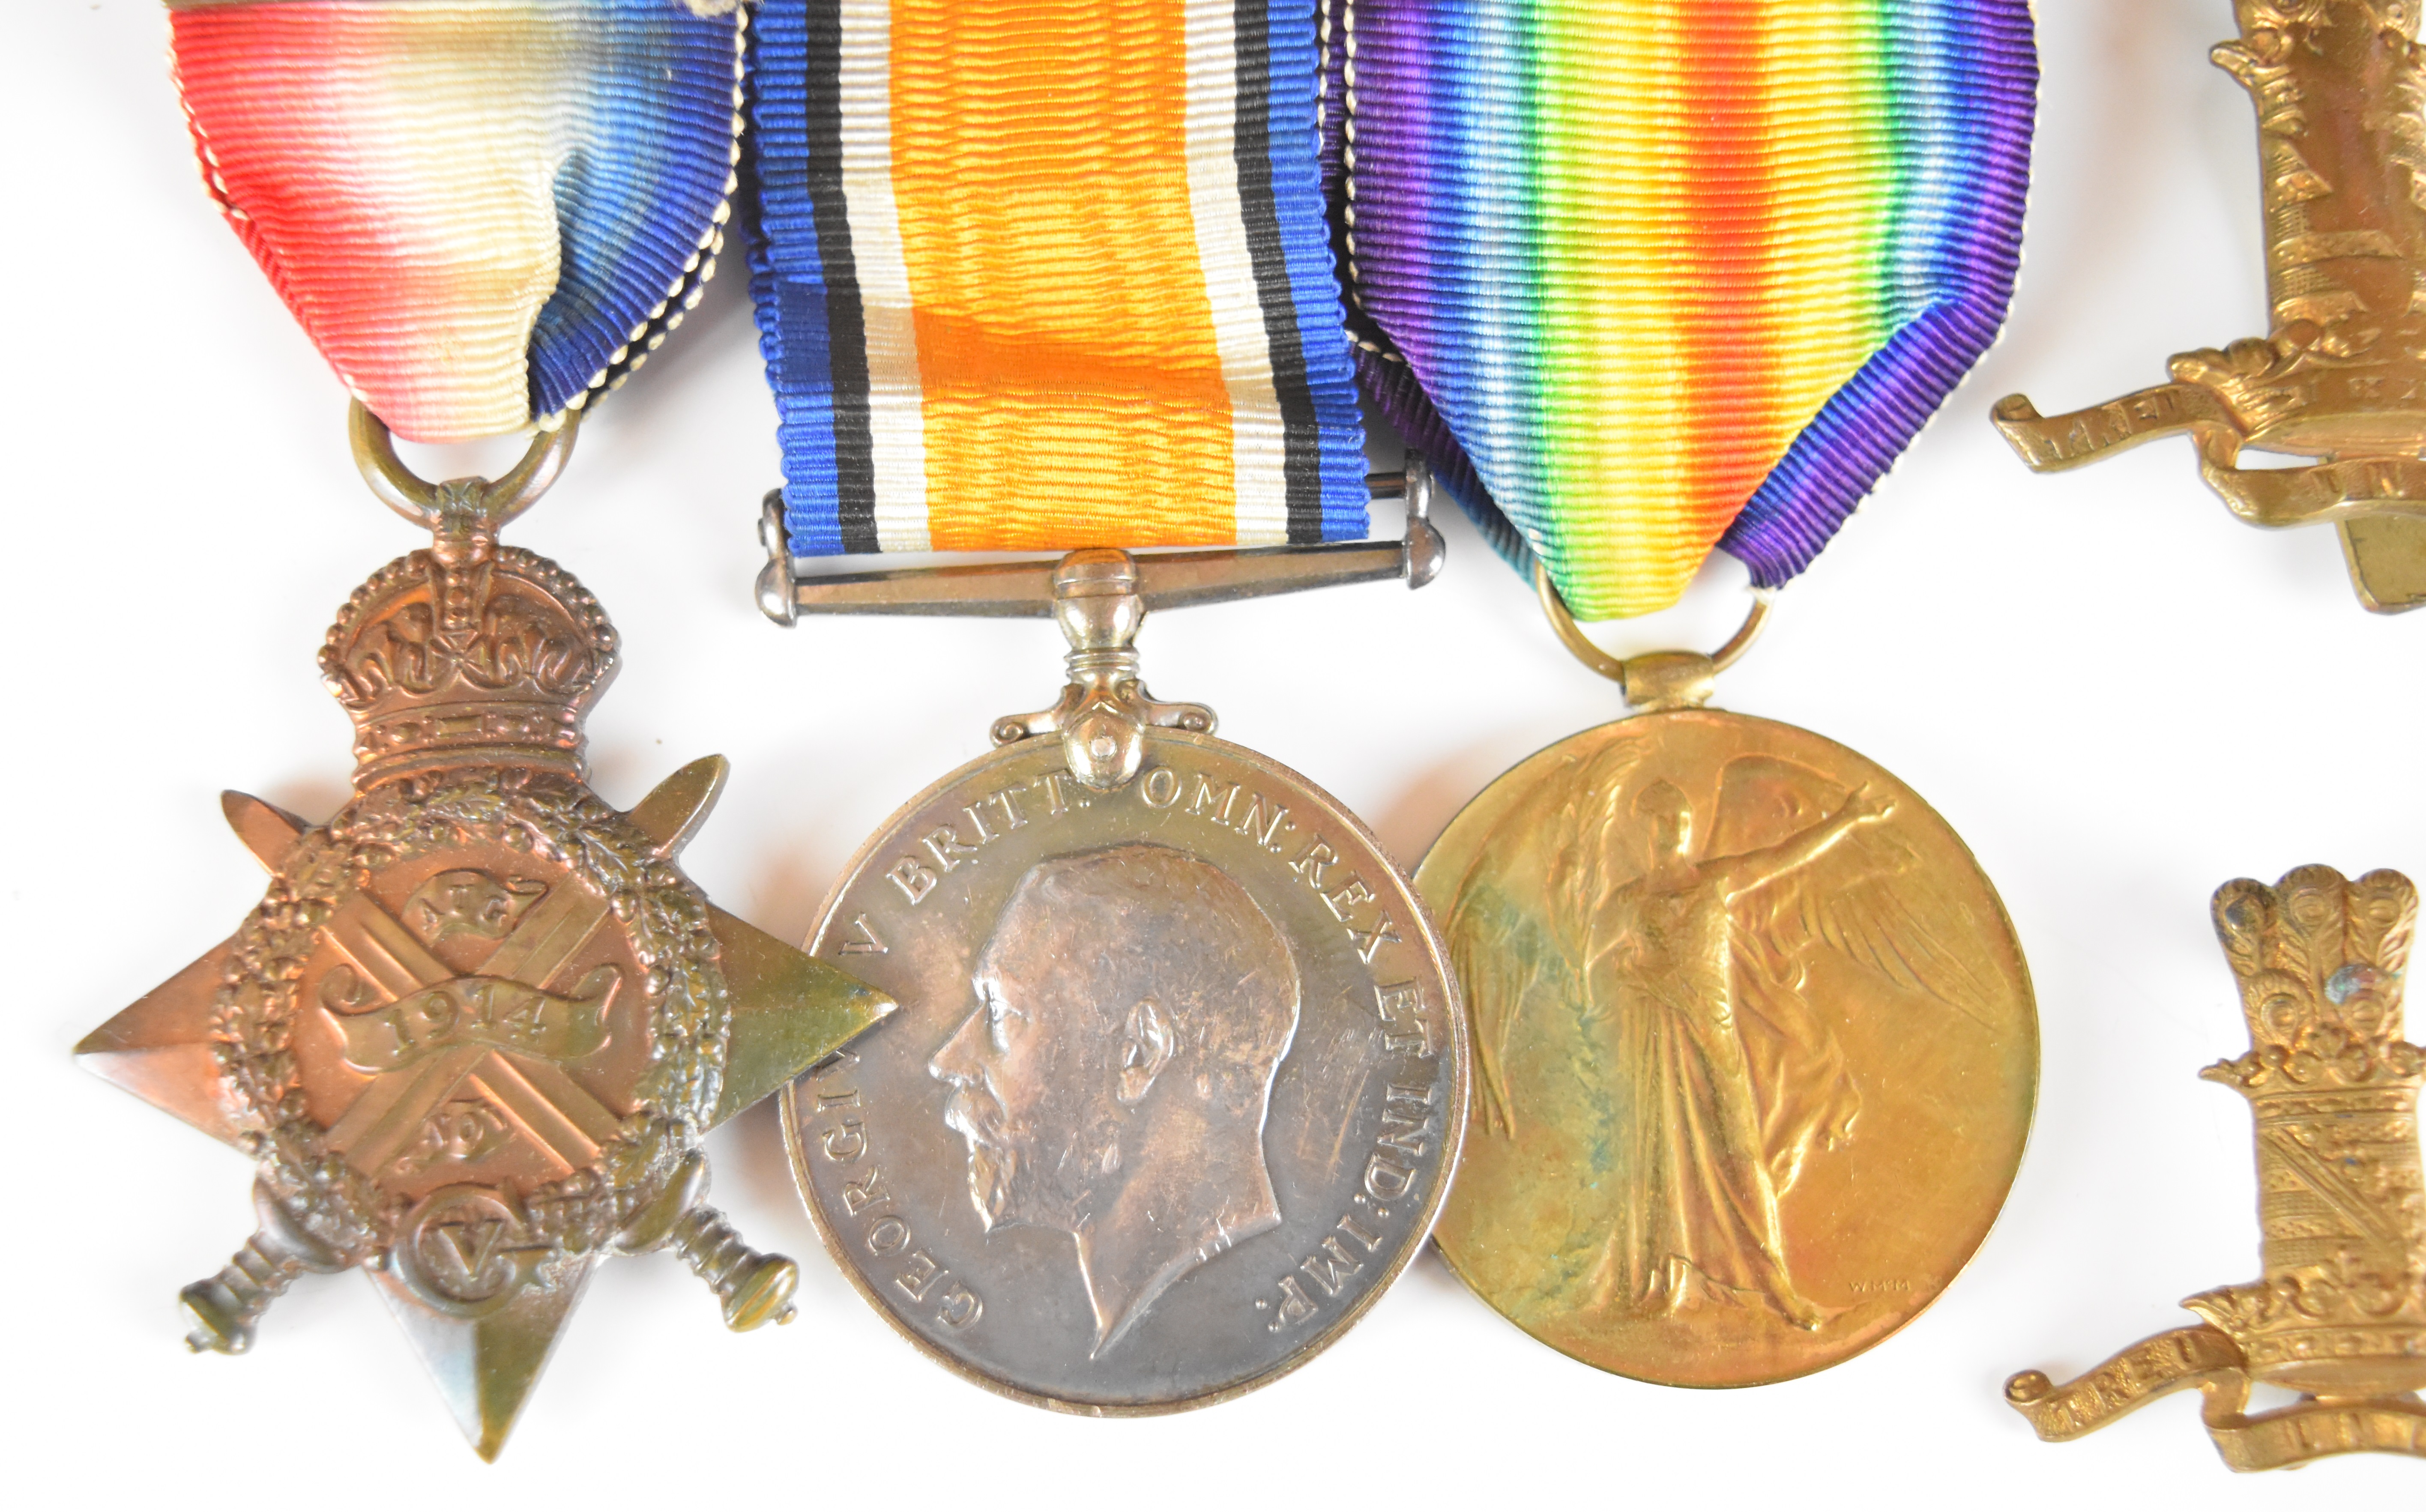 British Army WW1 11th Hussars medal trio comprising 1914 'Mons' Star with clasp for 5th August to - Image 2 of 13